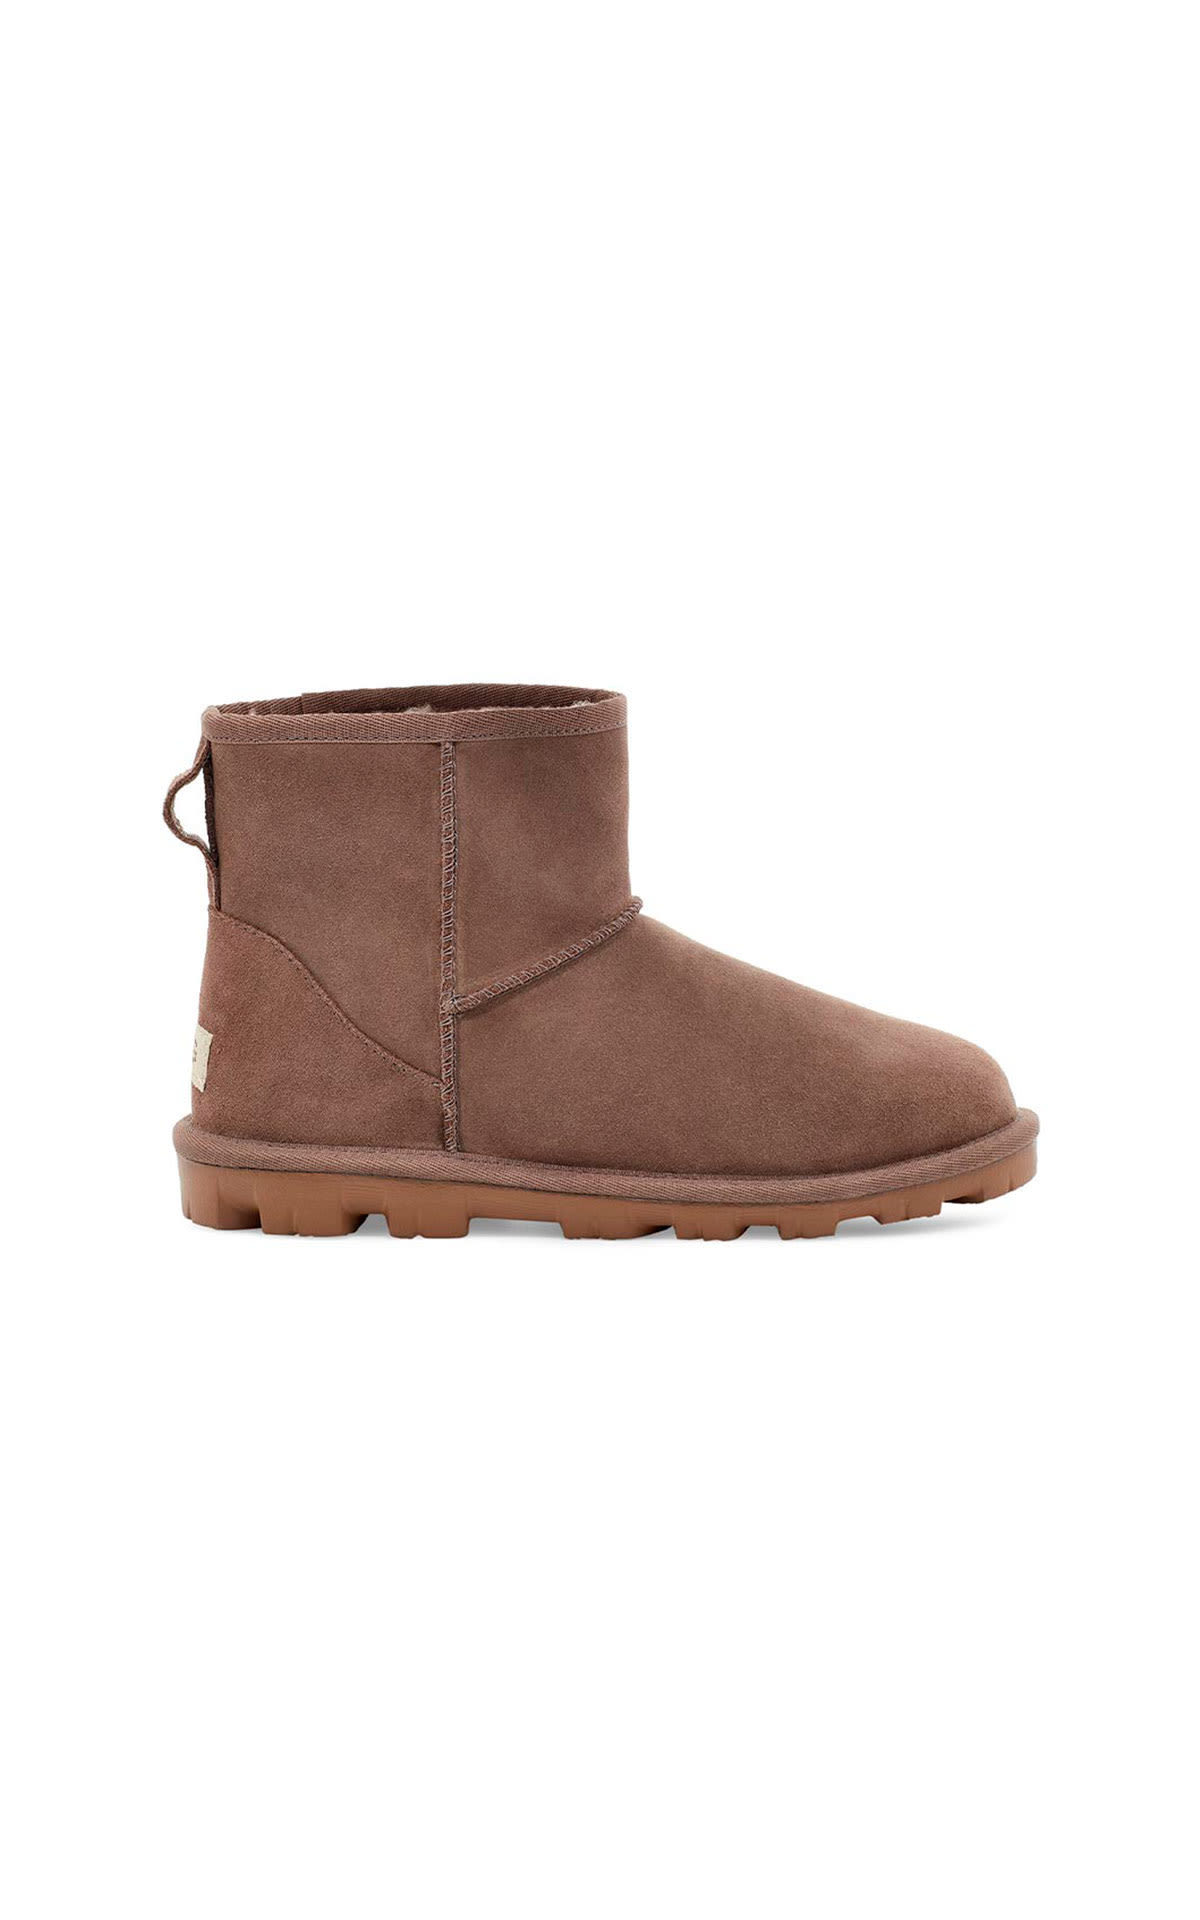 UGG classic brown boot